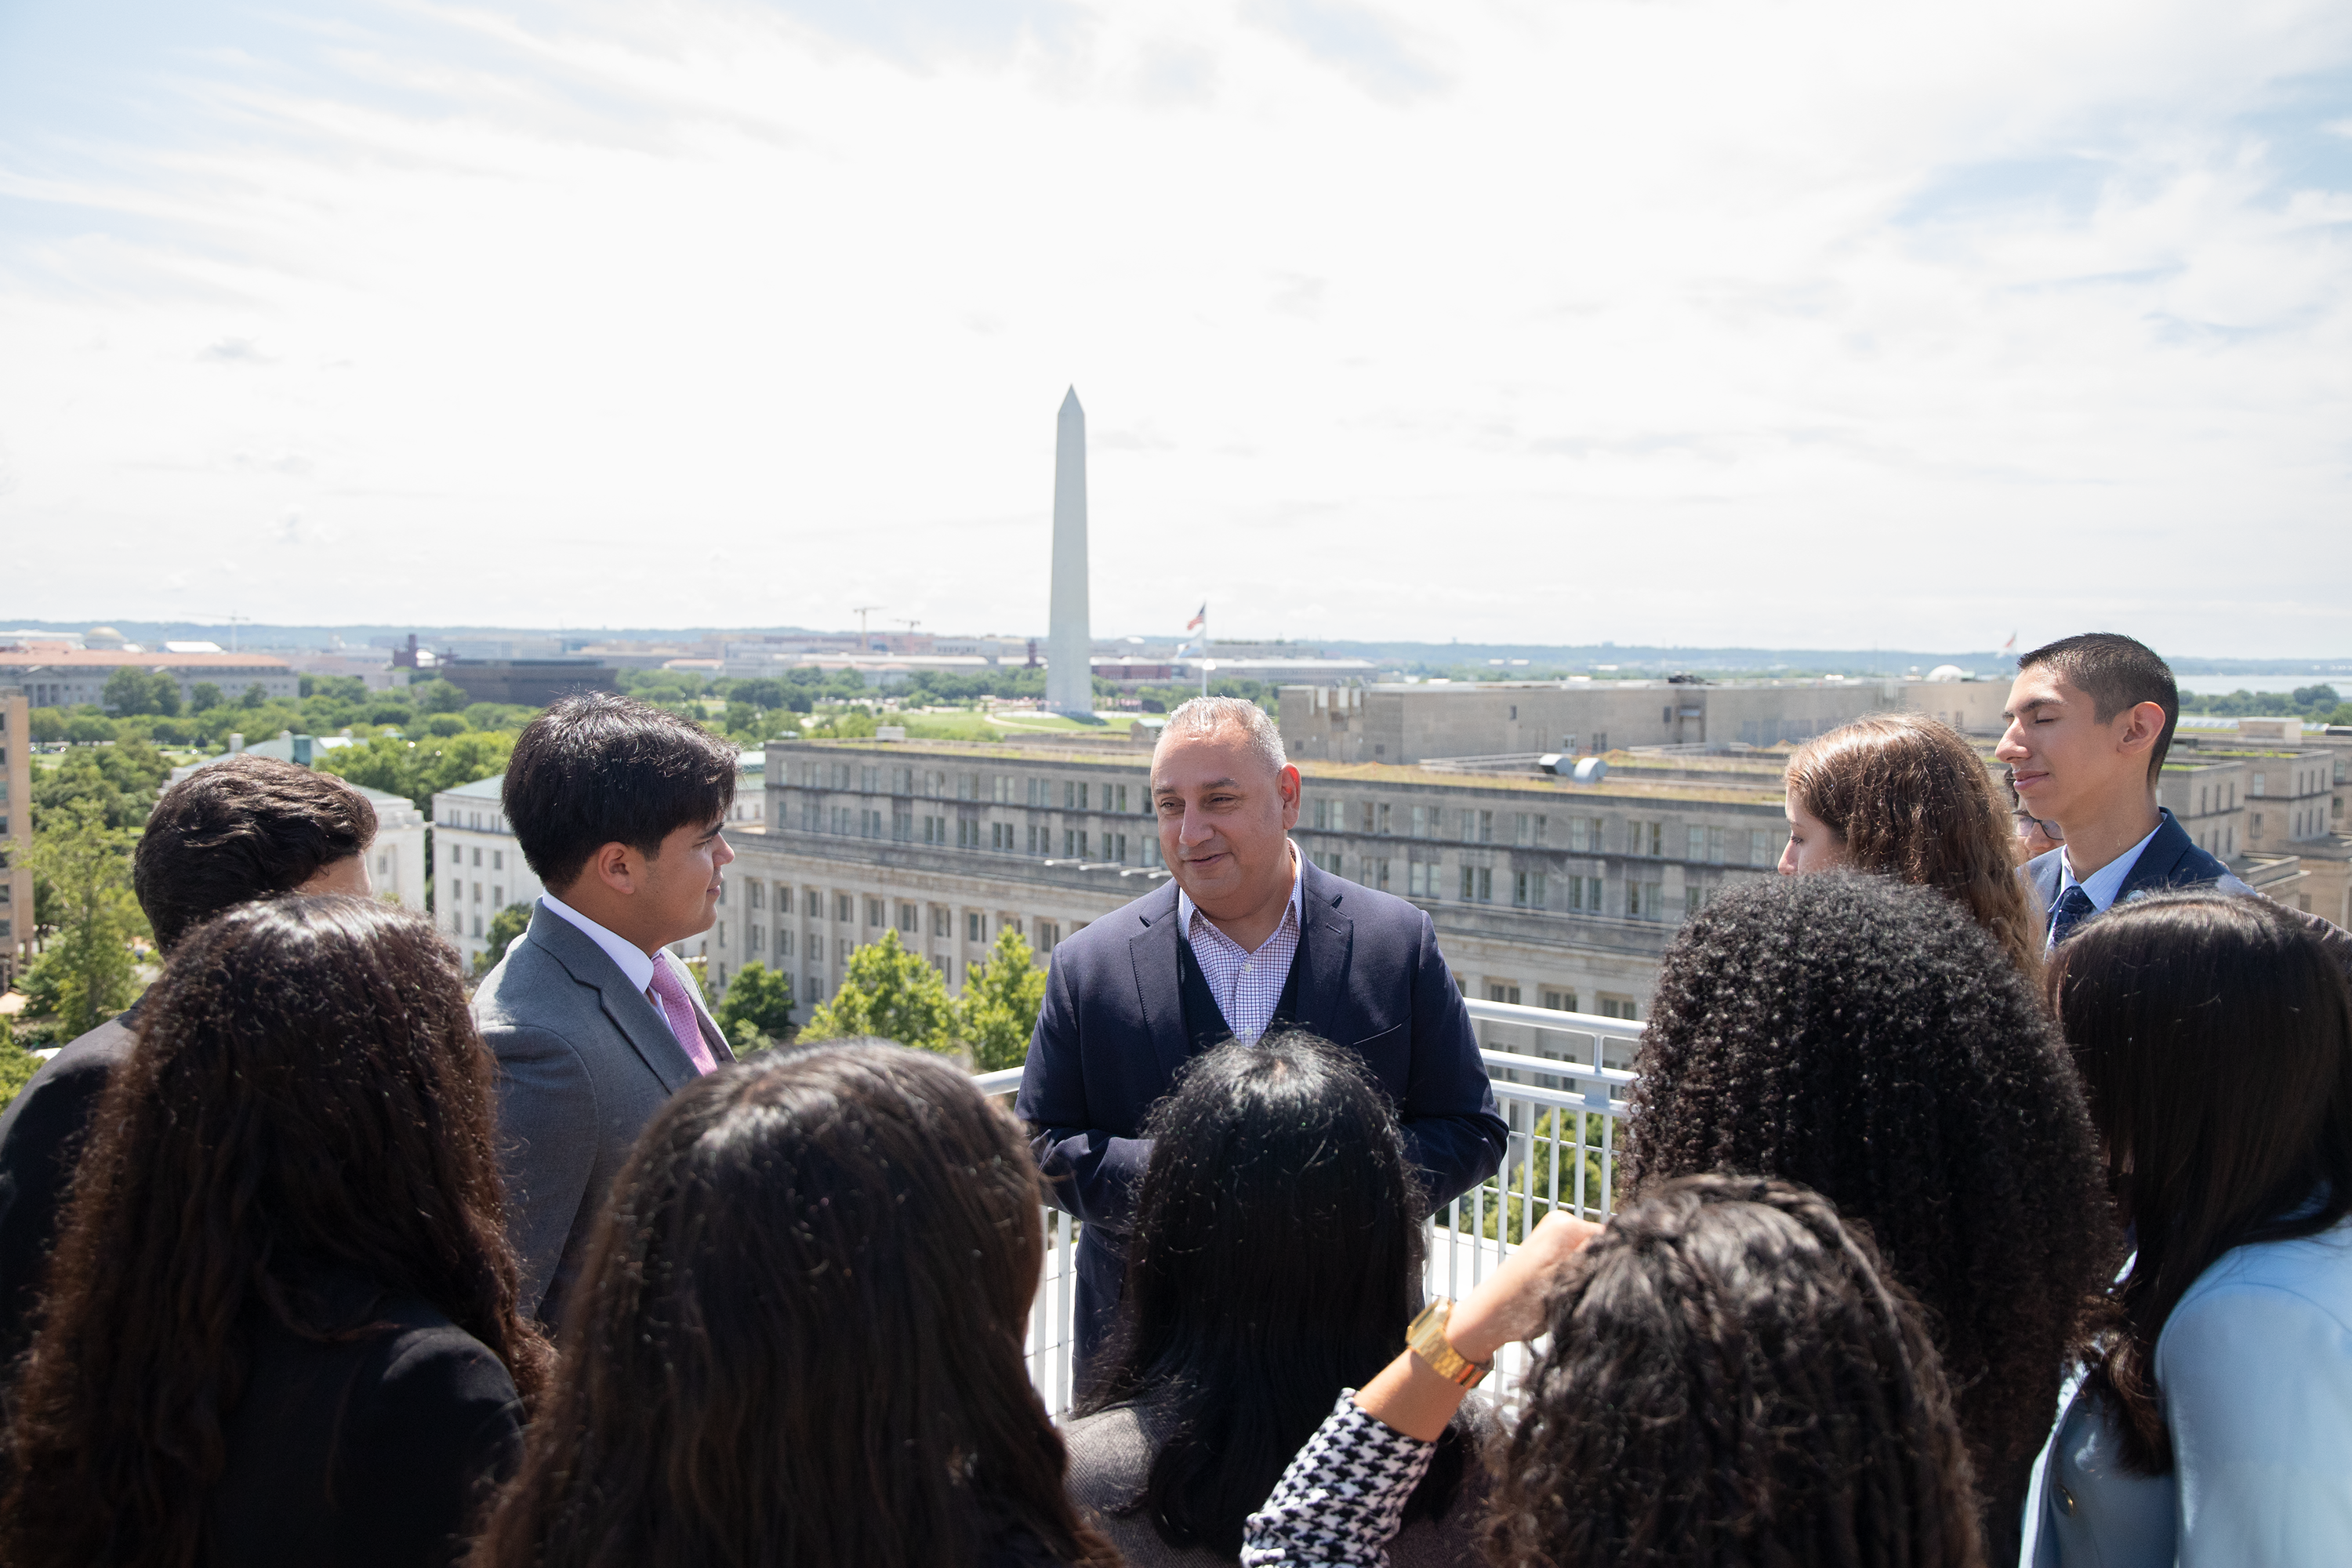 Gilbert Cisneros, BA ’94, spoke with students from the Caminos al Futuro on the terrace of the City View Room overlooking the Washington Monument.